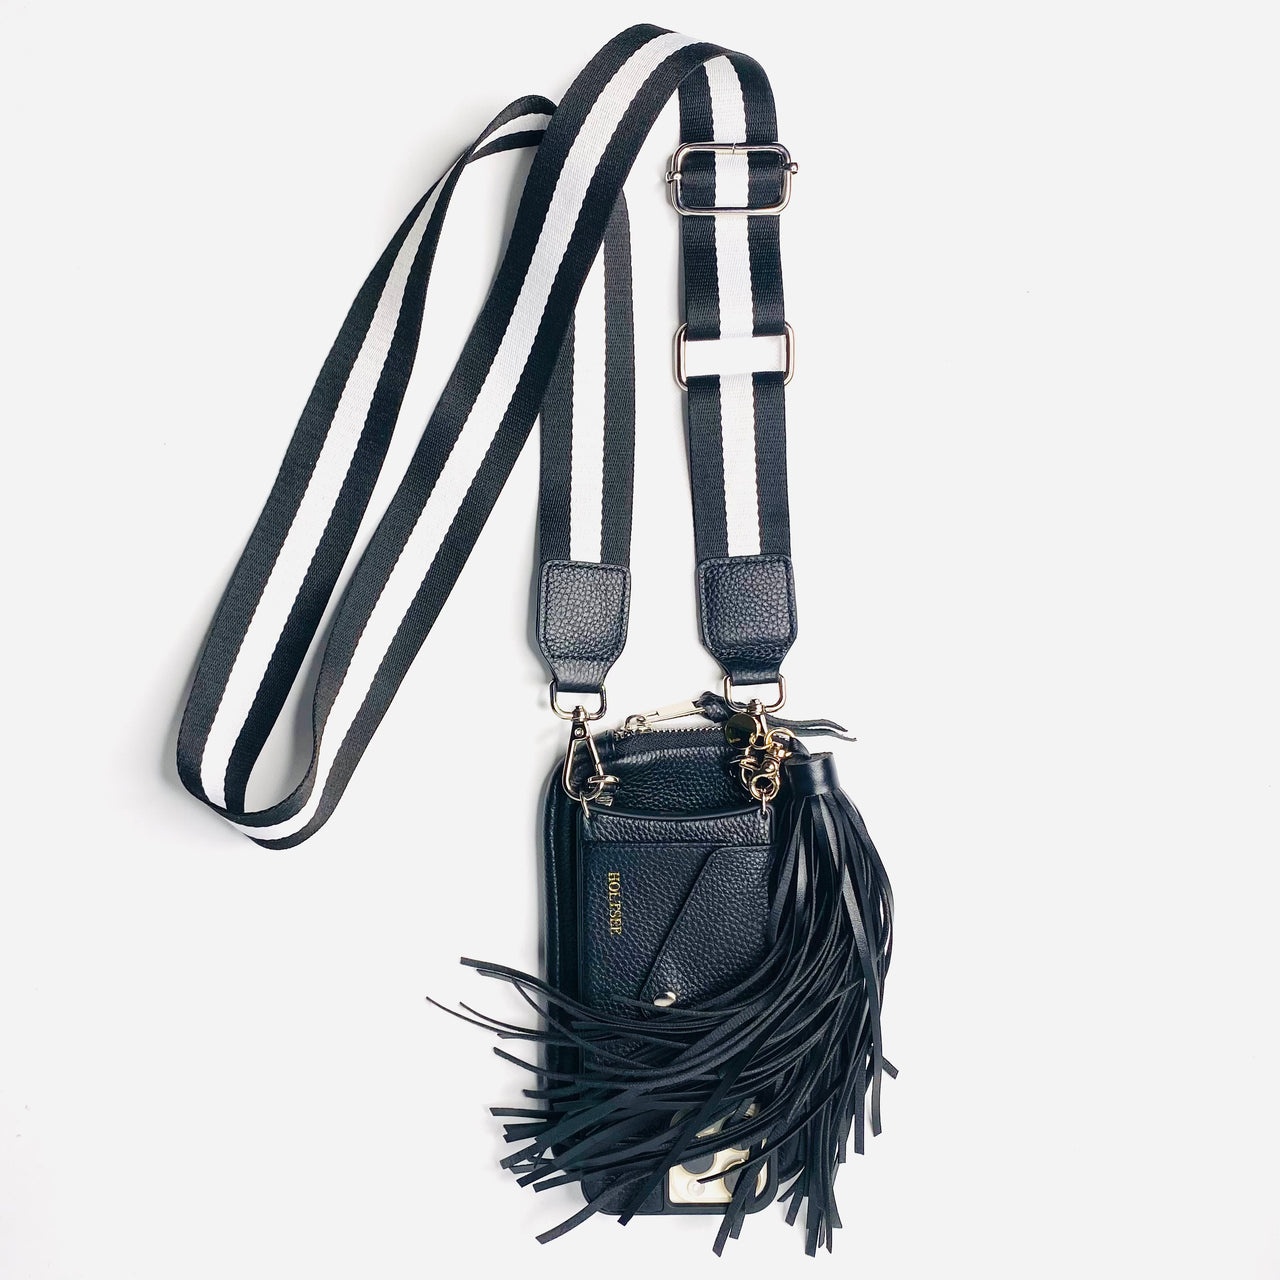 Sassy Iphone Case + Pouch + Removable Tassel